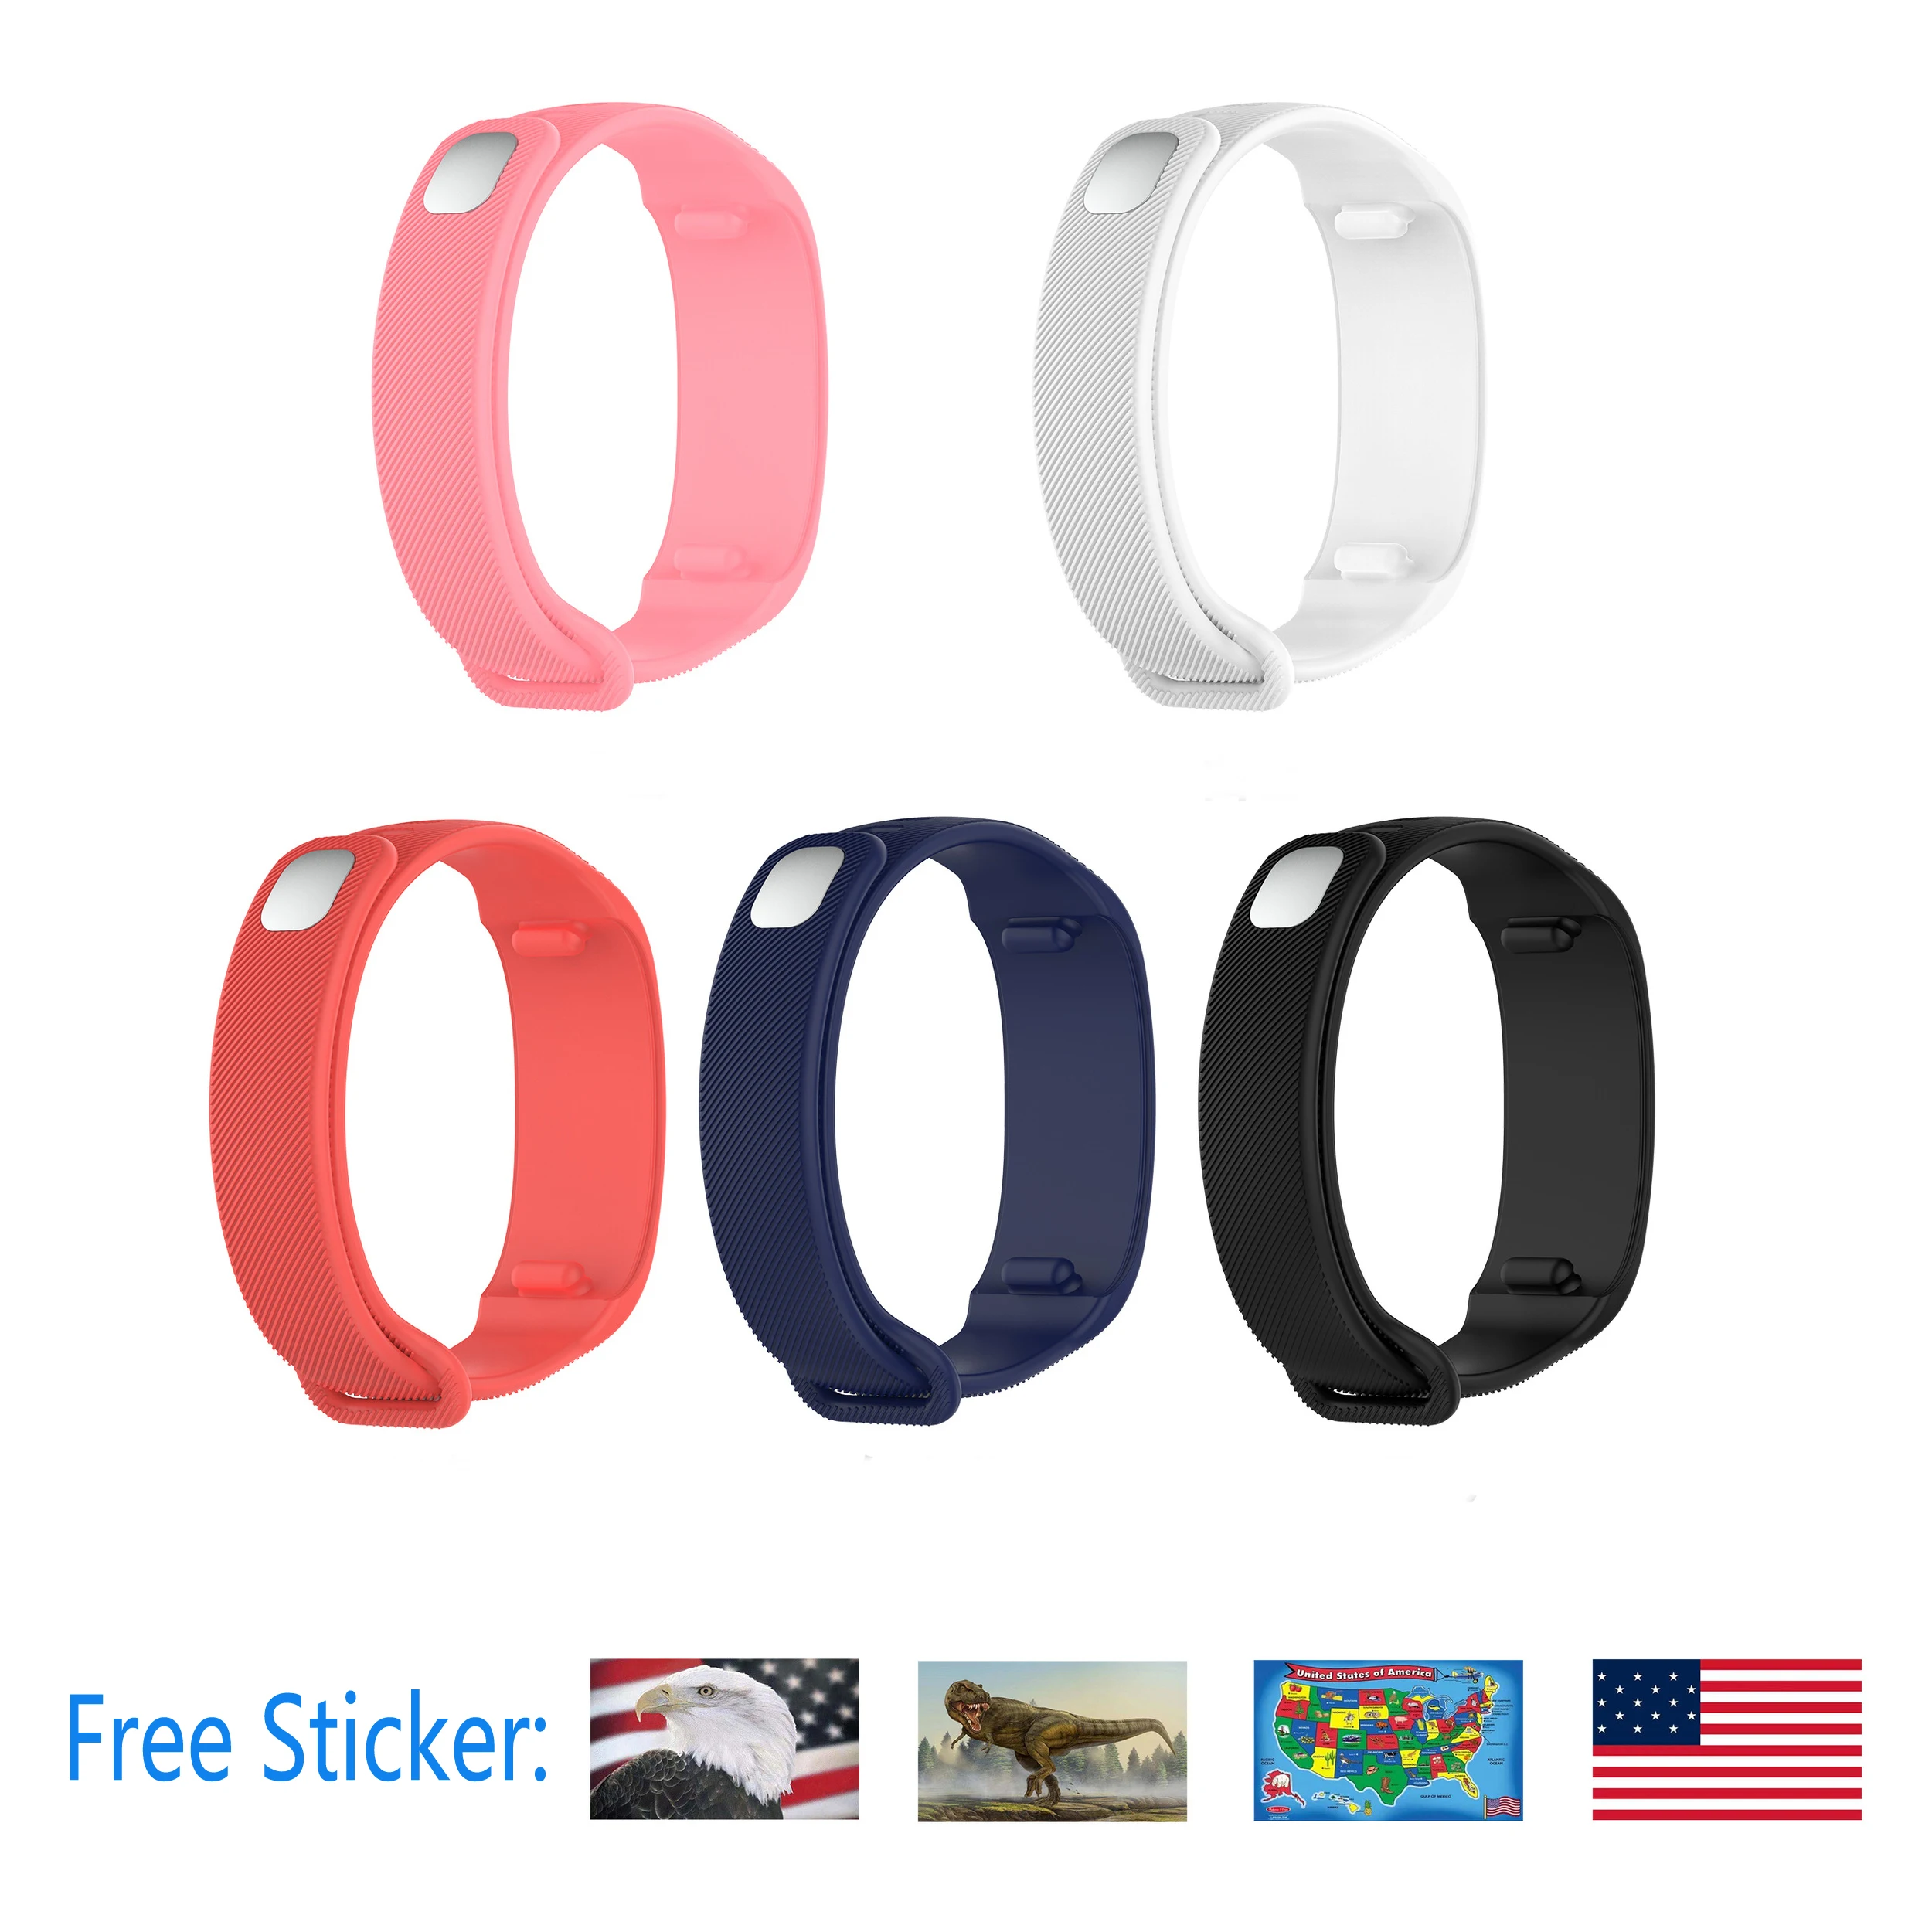 

Silicone Soft Smartband Sport Wrist Watchband Replacement For Amazon halo Band Strap Smart Wristband Bracelet Accessories